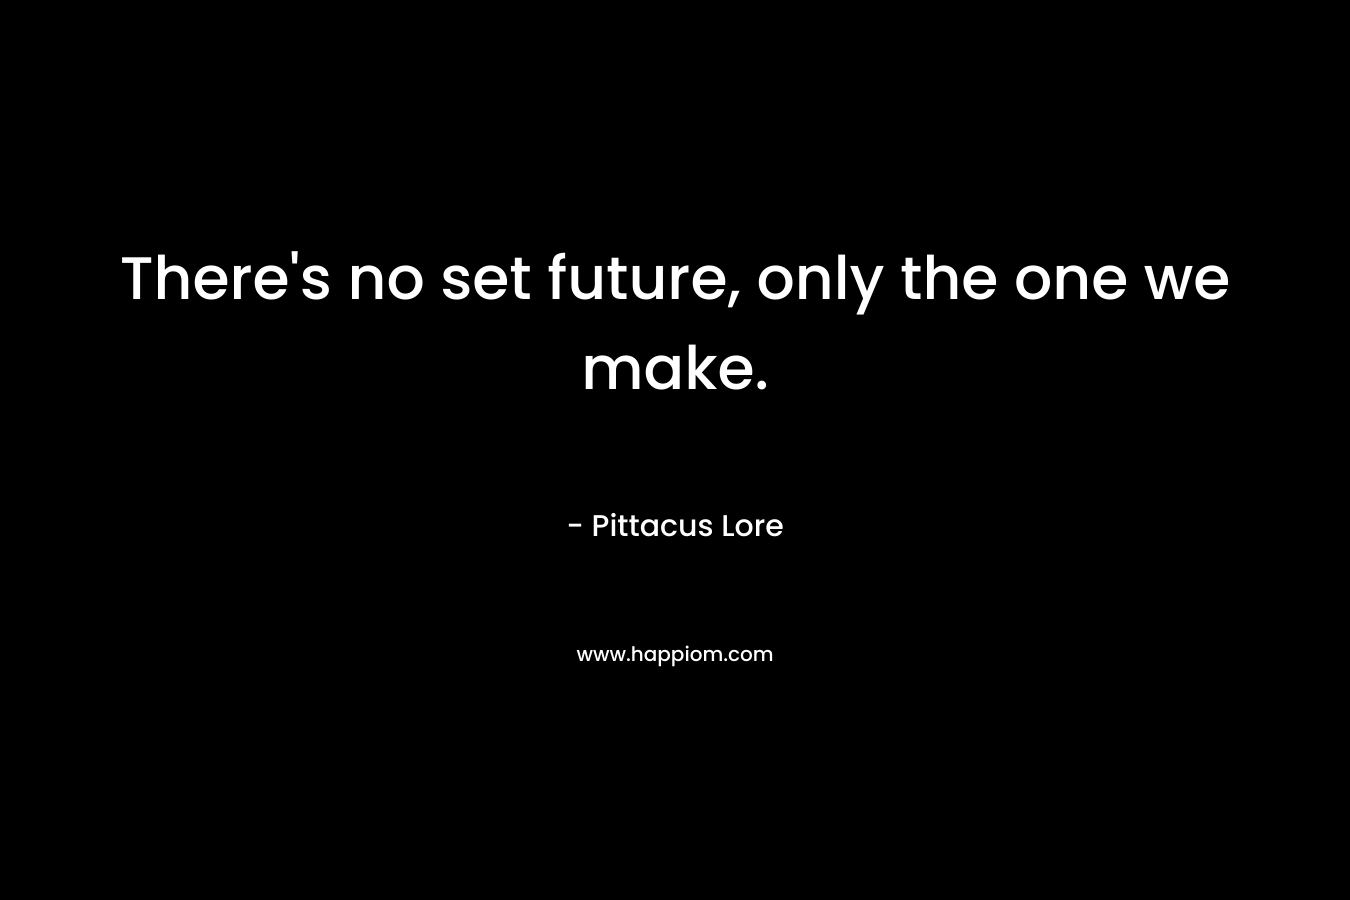 There’s no set future, only the one we make. – Pittacus Lore